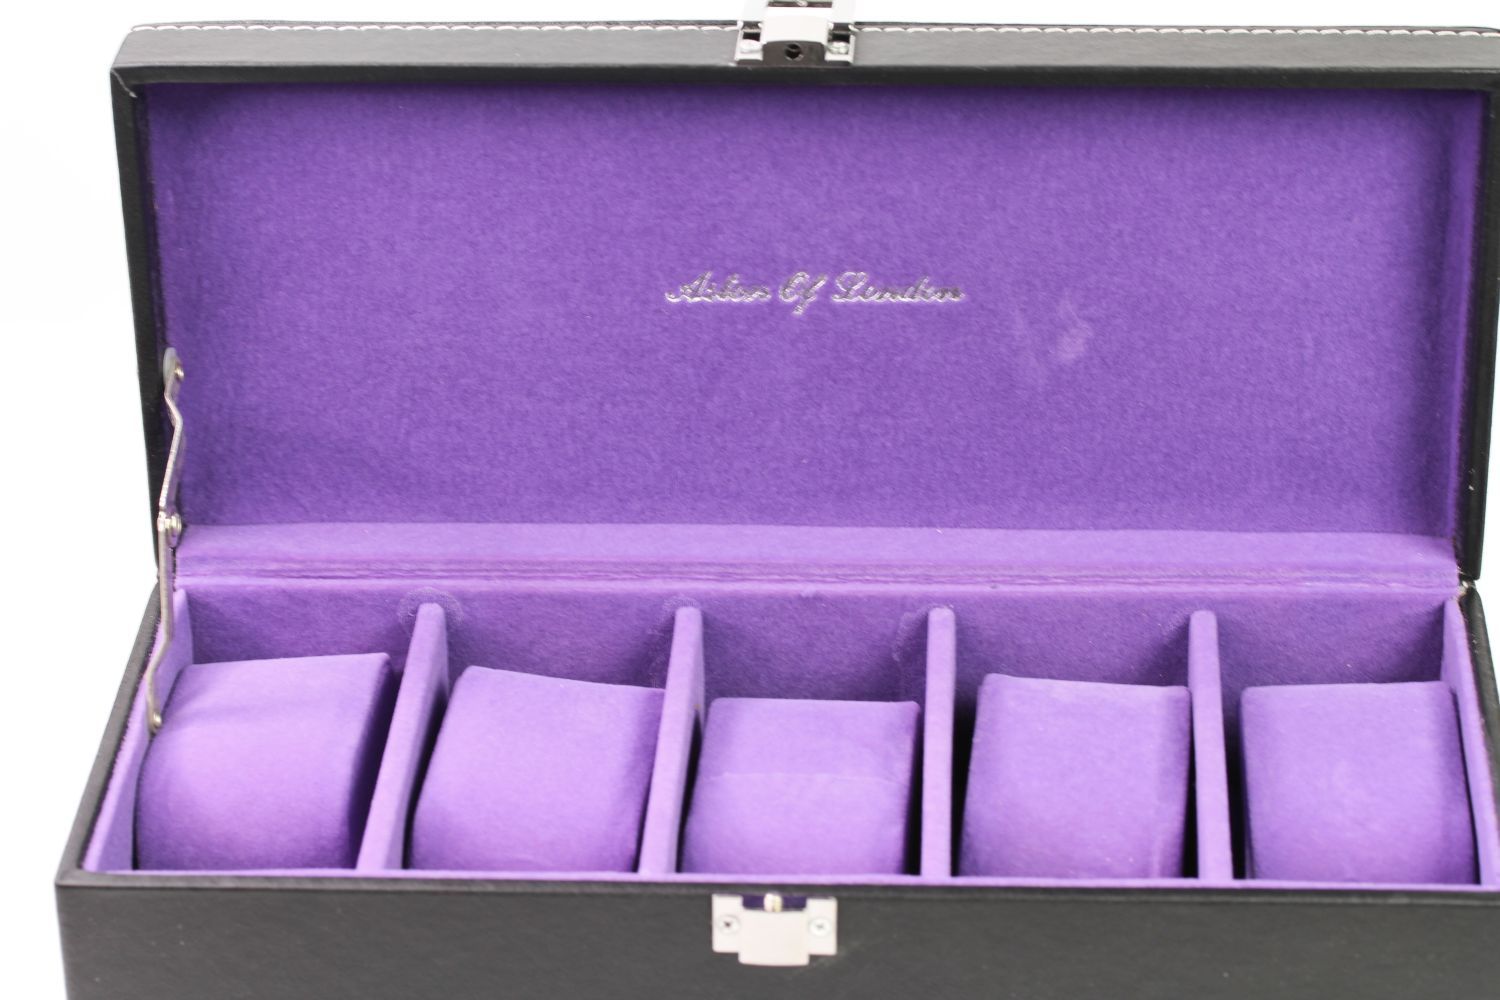 ASTON OF LONDON BLACK 5 PIECE WATCH BOX, 5 piece watch box, comes with 5 cushions, purple - Image 2 of 3